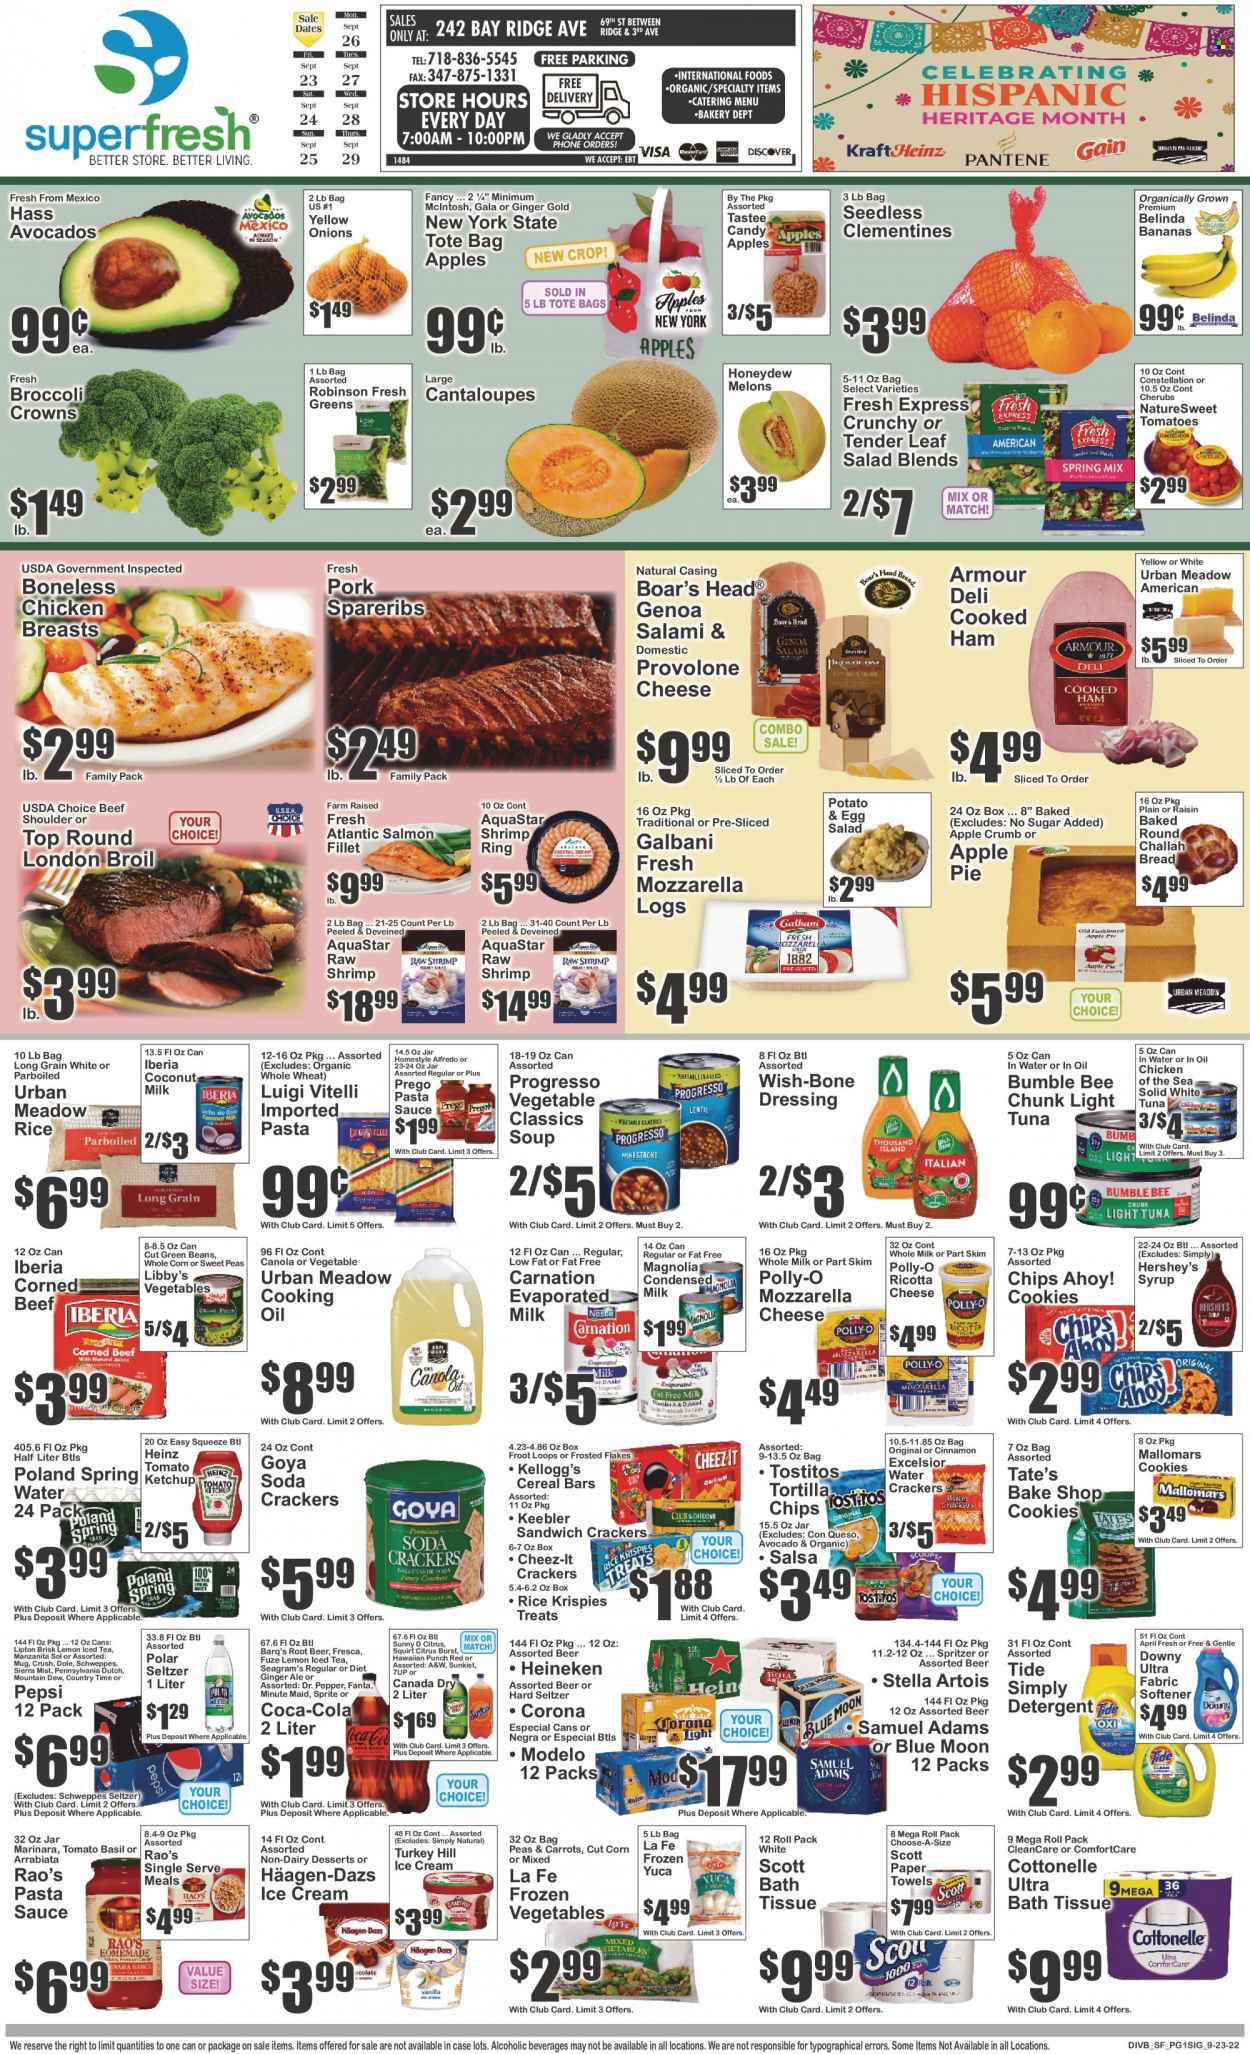 thumbnail - Super Fresh Flyer - 09/23/2022 - 09/29/2022 - Sales products - bread, pie, apple pie, challah, cantaloupe, corn, green beans, salad, Dole, avocado, Gala, honeydew, salmon, salmon fillet, tuna, shrimps, pasta sauce, soup, Bumble Bee, sauce, Progresso, cooked ham, salami, ham, corned beef, mozzarella, ricotta, Galbani, Provolone, evaporated milk, condensed milk, eggs, ice cream, Hershey's, Häagen-Dazs, frozen vegetables, cookies, cereal bar, crackers, Kellogg's, Chips Ahoy!, Keebler, tortilla chips, Cheez-It, Tostitos, coconut milk, Heinz, light tuna, Chicken of the Sea, Goya, cereals, Rice Krispies, Frosted Flakes, cinnamon, ketchup, dressing, salsa, cooking oil, syrup, Canada Dry, Coca-Cola, ginger ale, Mountain Dew, Schweppes, Sprite, Pepsi, Fanta, Lipton, ice tea, Dr. Pepper, 7UP, A&W, Sierra Mist, Country Time, fruit punch, soda, Hard Seltzer, beer, Corona Extra, Heineken, Modelo, chicken breasts, beef meat, pork spare ribs, bath tissue, Cottonelle, Scott, kitchen towels, paper towels, detergent, Tide, fabric softener, Downy Laundry, clementines, Stella Artois, melons, Blue Moon. Page 1.